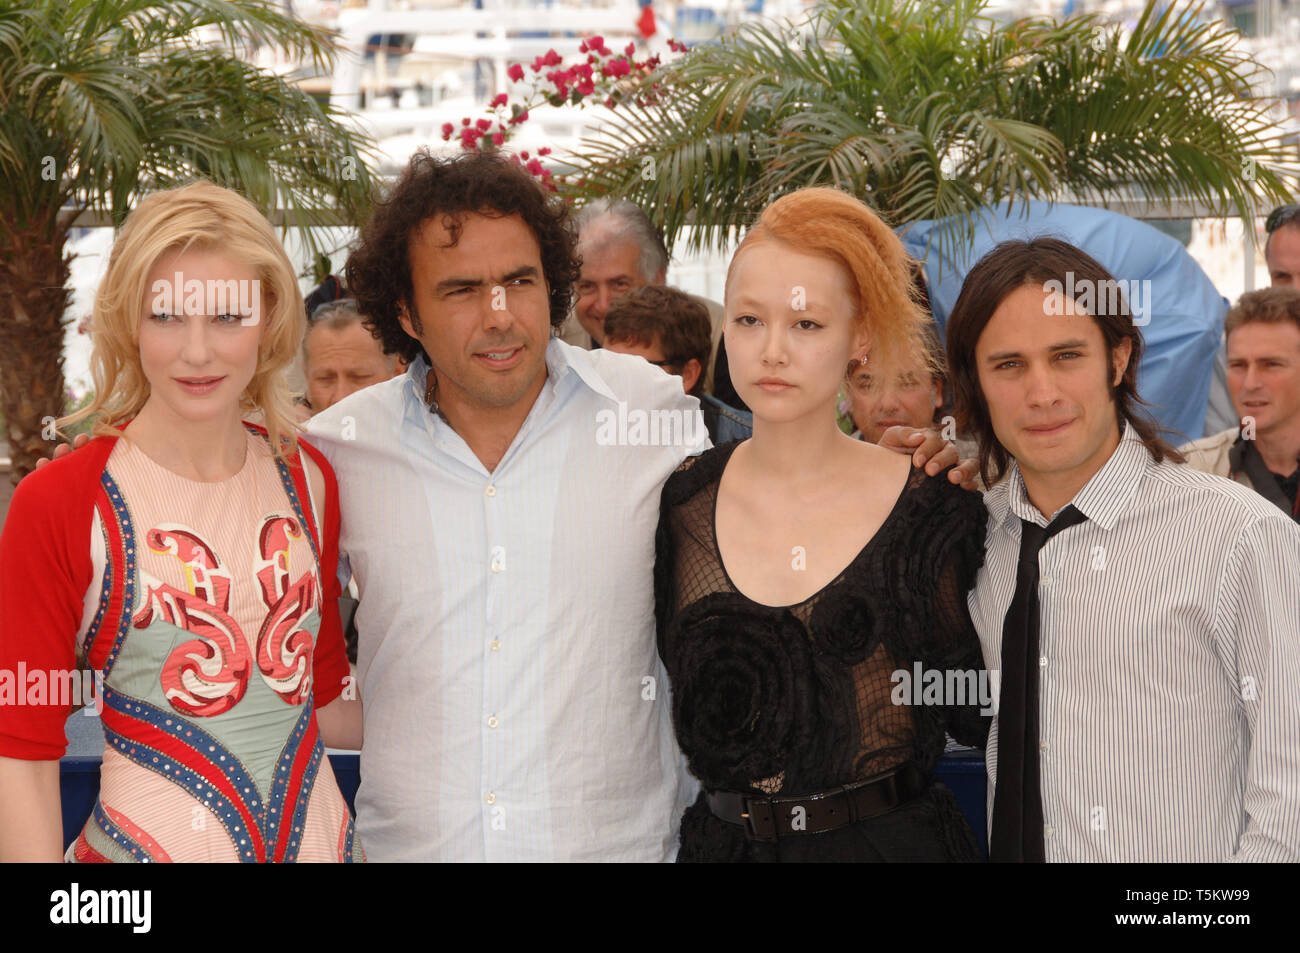 CANNES, FRANCE. May 23, 2006: Actresses CATE BLANCHETT (left) & RINKO KIKUCHI, actor GAEL GARCIA BERNAL (right) & director ALEJANDRO GONZALEZ INARRITU at the photocall for 'Babel' at the 59th Annual International Film Festival de Cannes. © 2006 Paul Smith / Featureflash Stock Photo